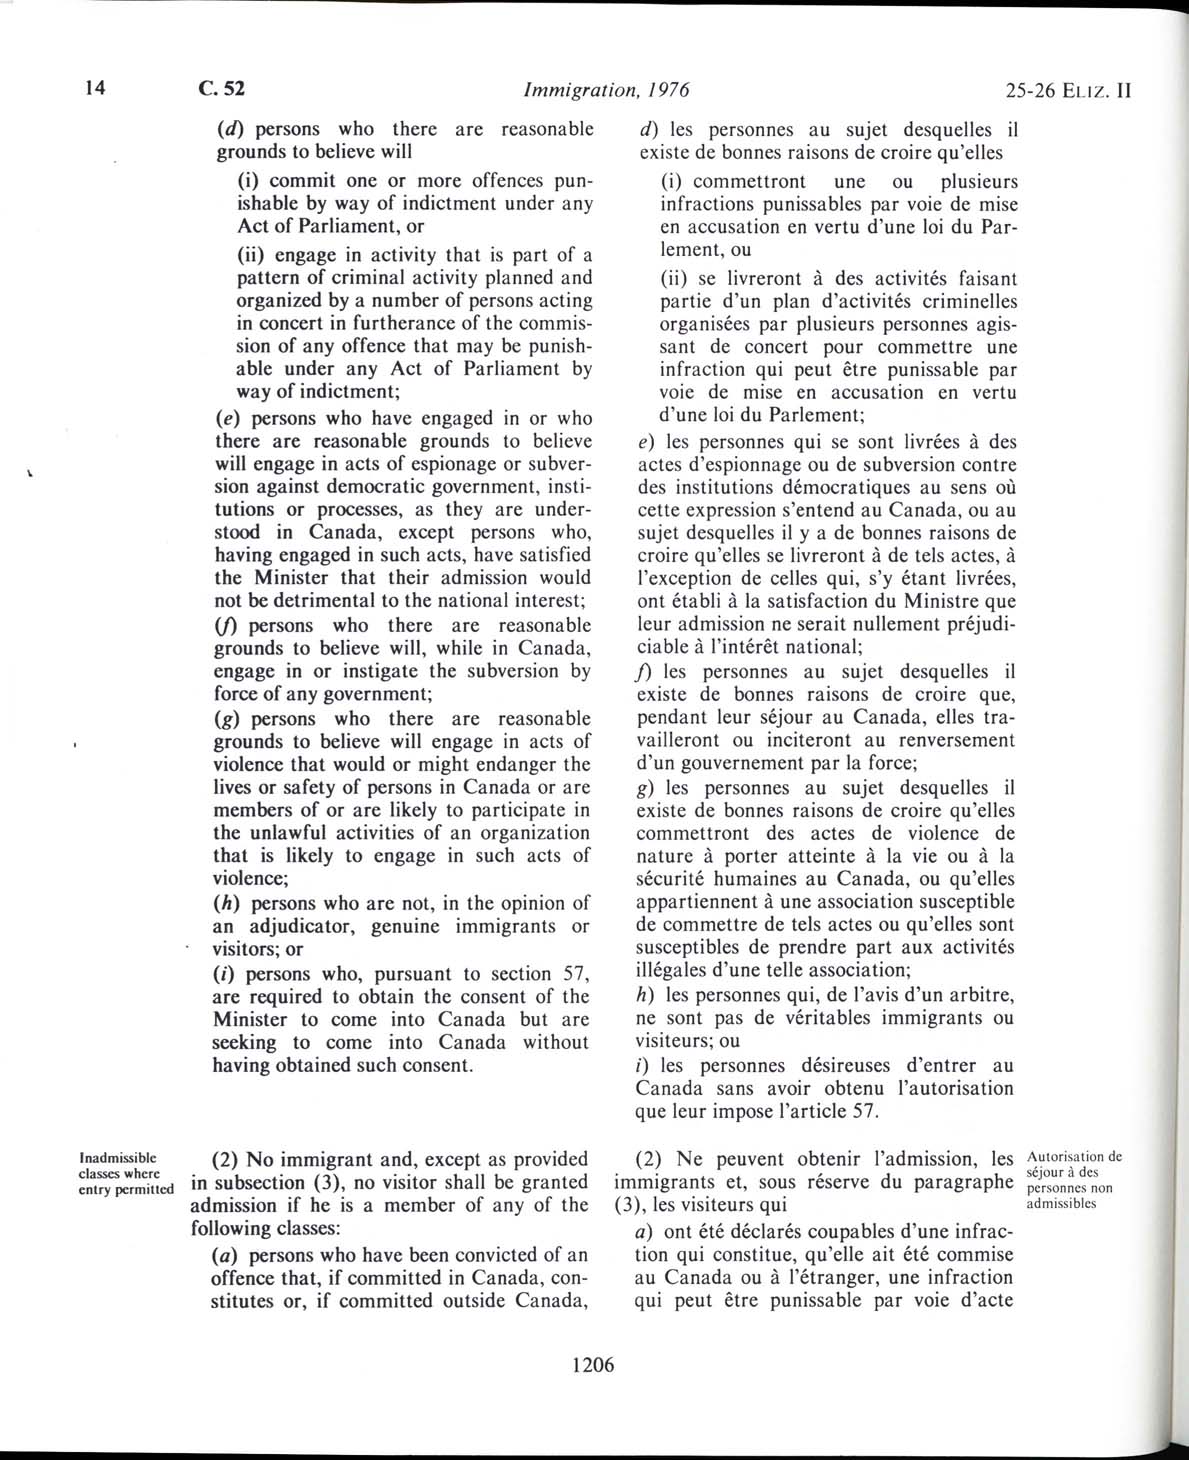 Page 1206 Immigration Act, 1976